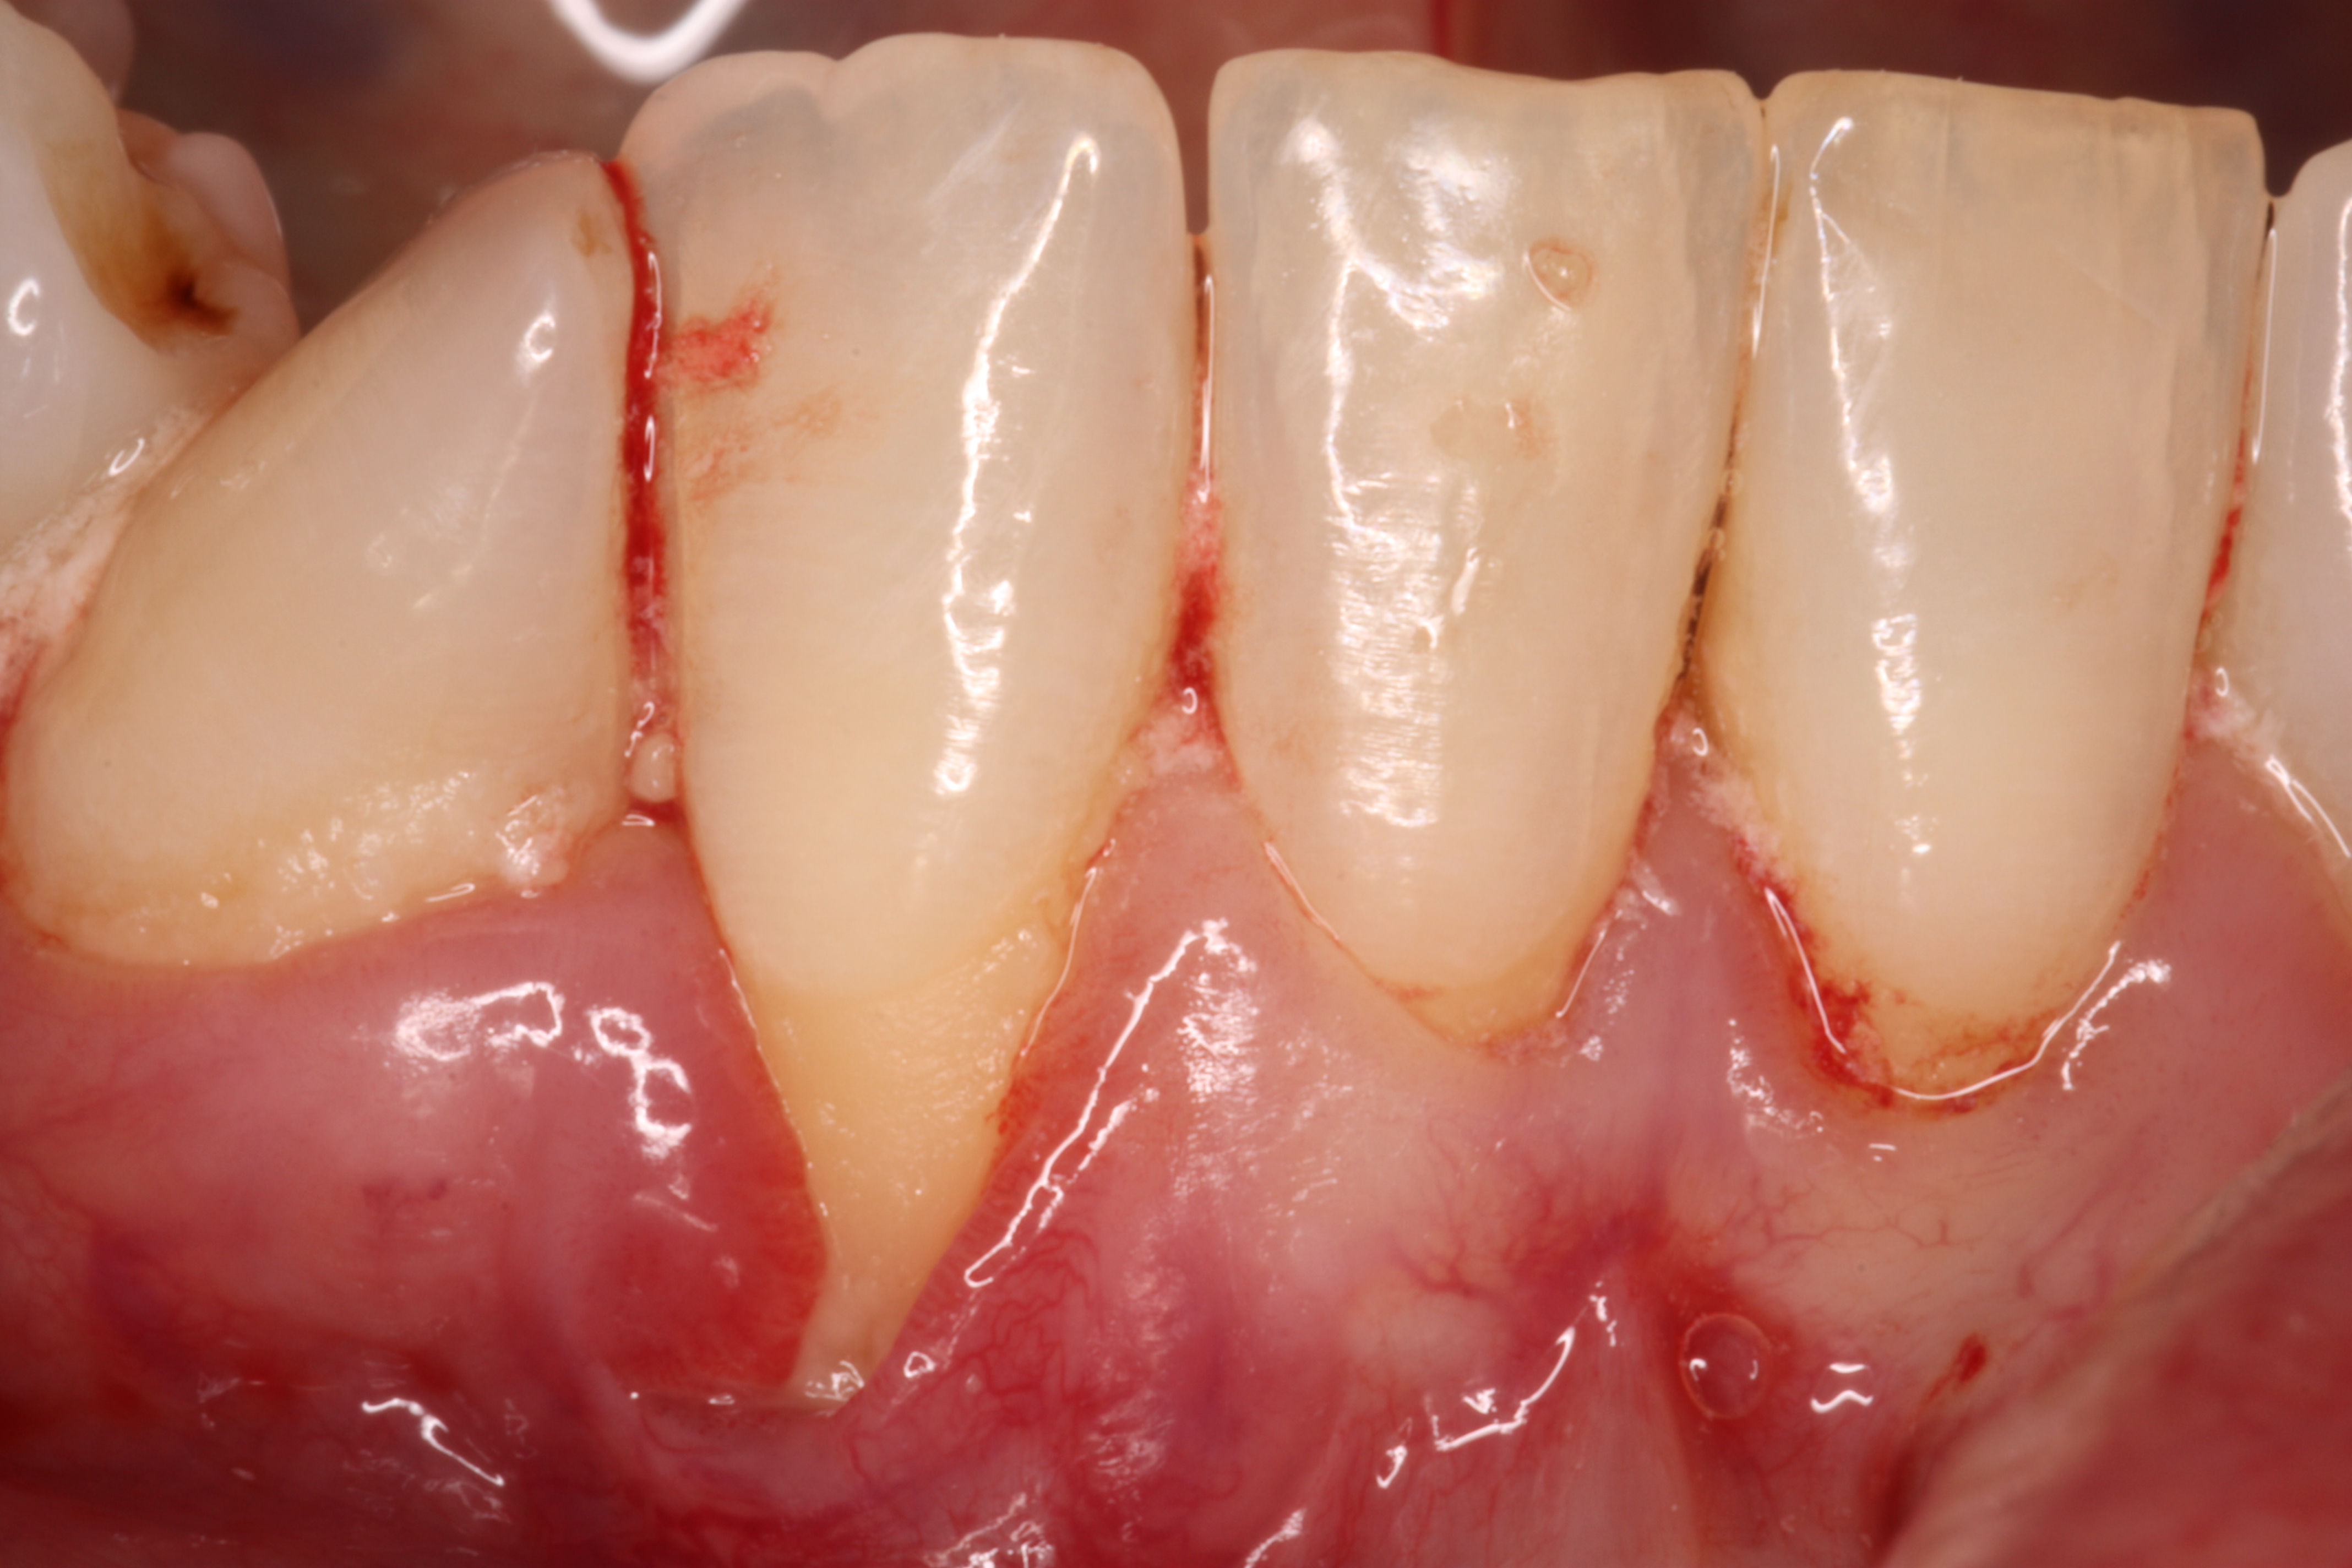 Gum Deformity with chronic inflammation